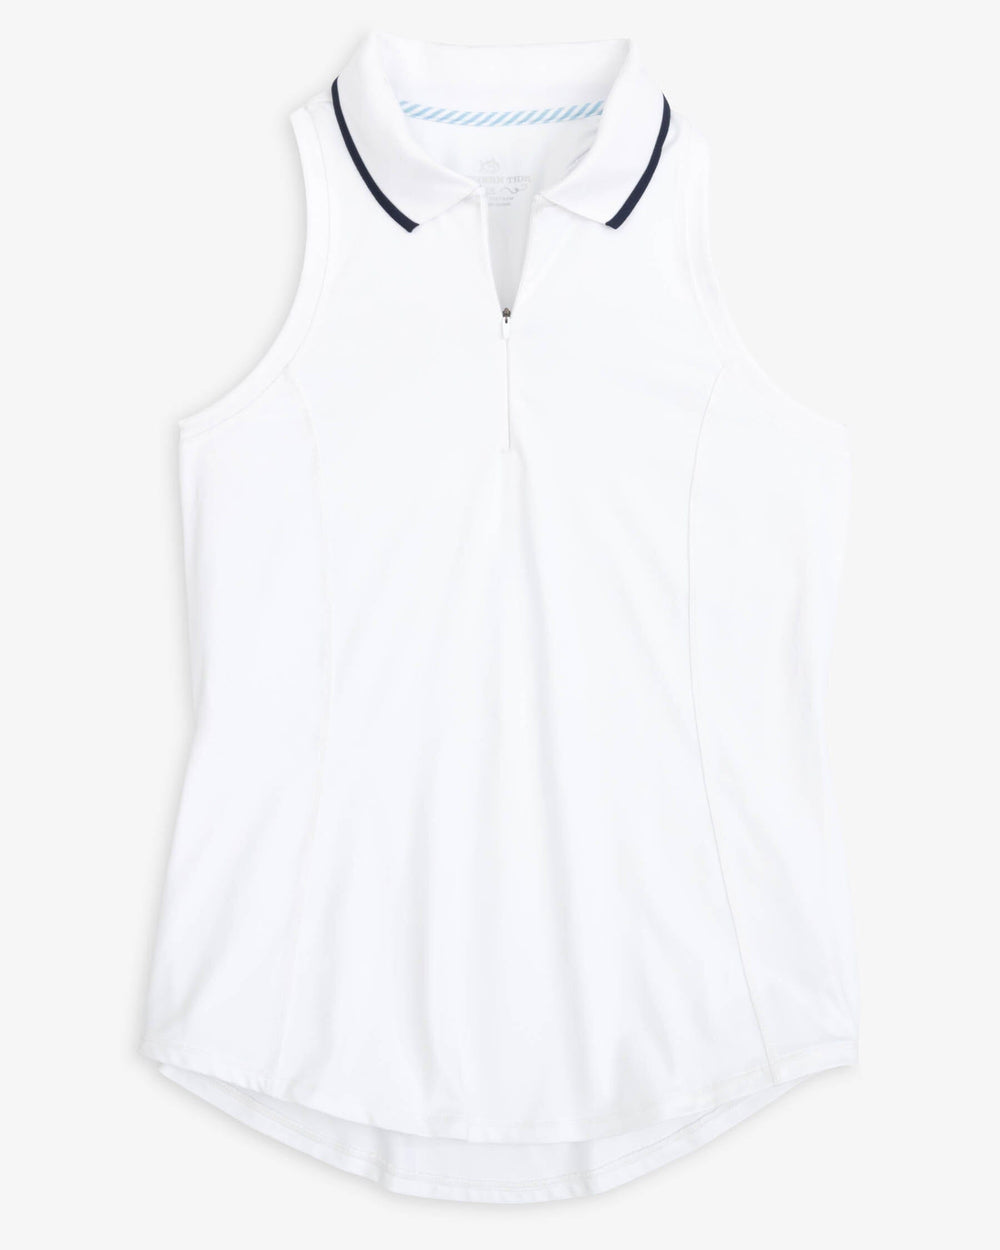 The front view of the Southern Tide Kristy Performance Tank by Southern Tide - Classic White